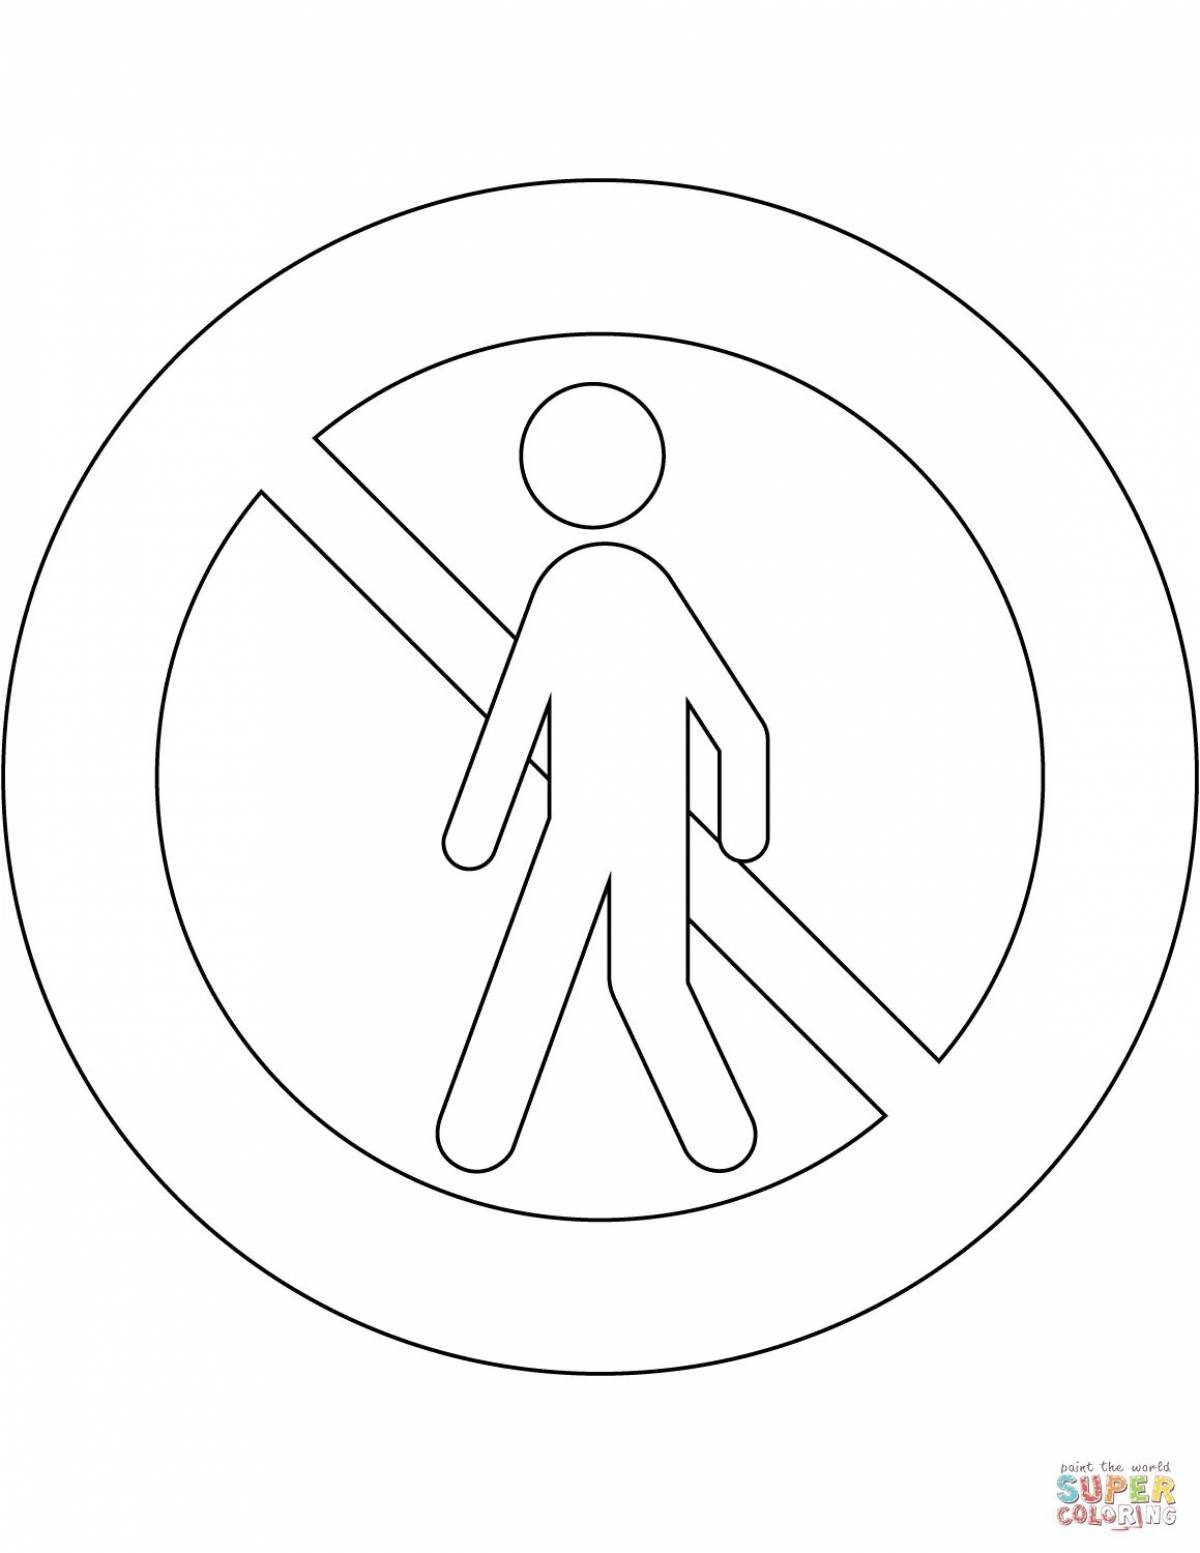 3rd grade traffic sign coloring pages